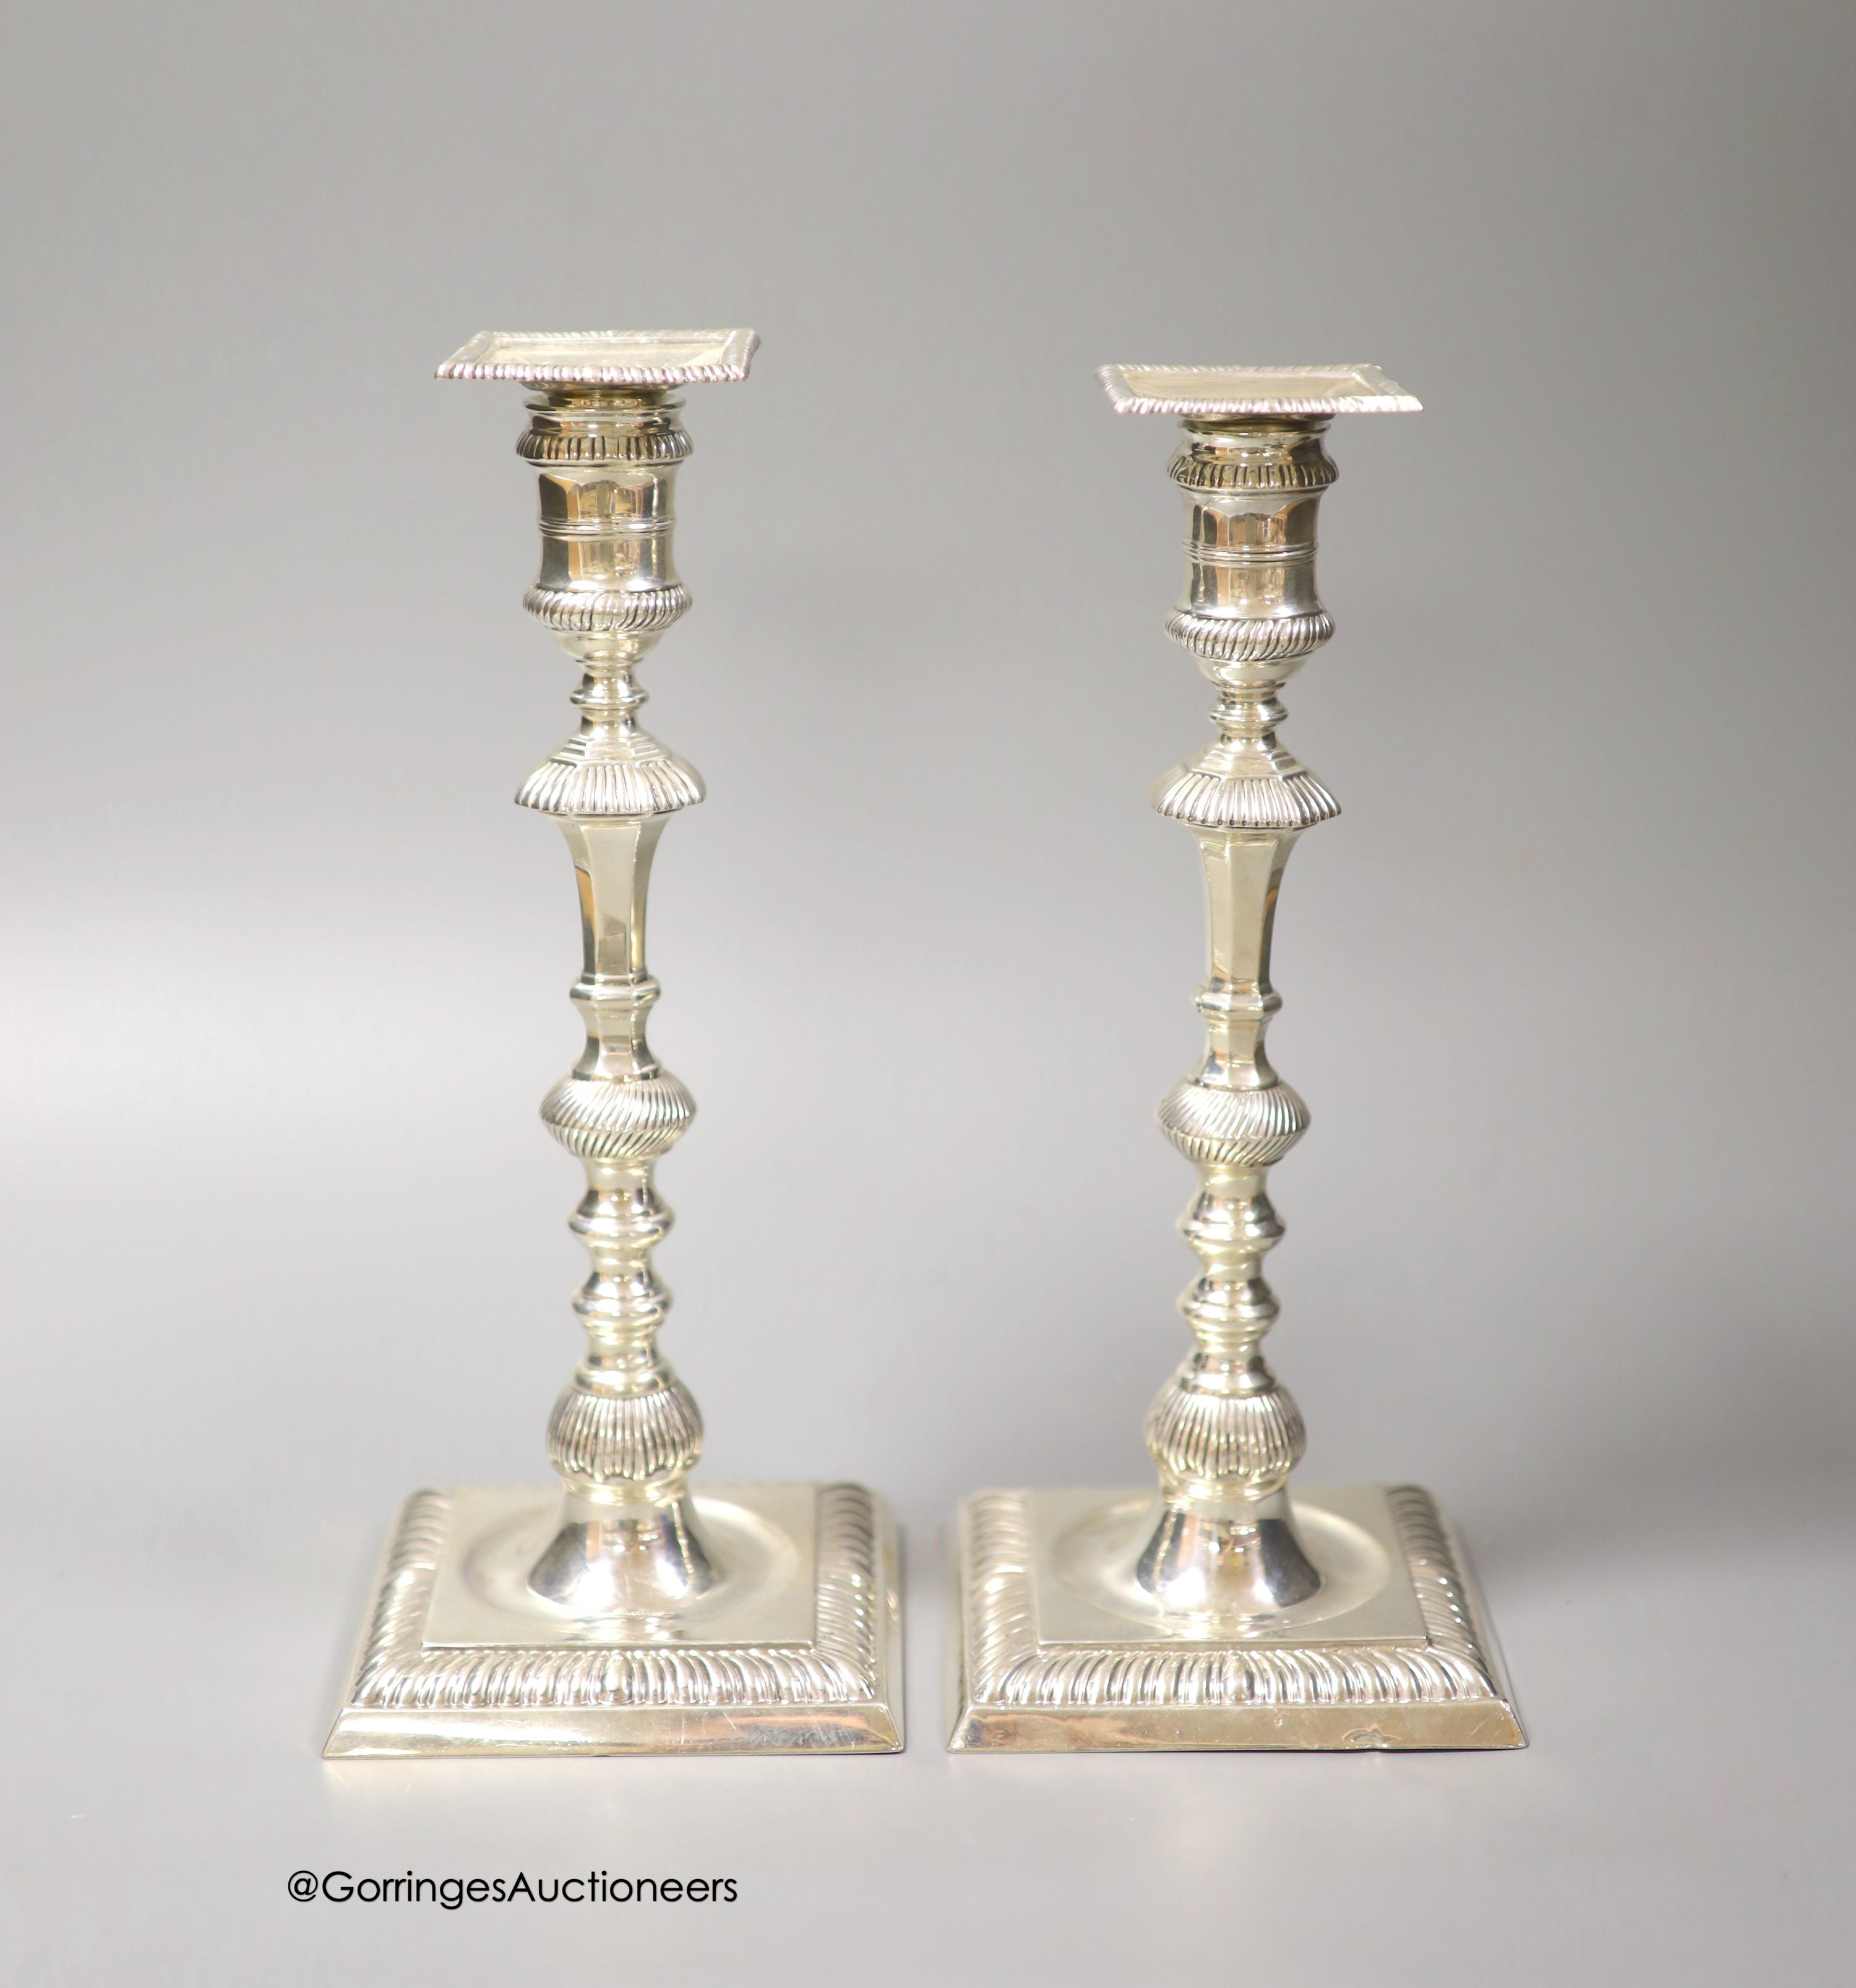 A matched pair of late Victorian/Edwardian silver candlesticks, Thomas Bradbury & Sons, London, 1893/4 & London, 1905, 26.2cm, weighted